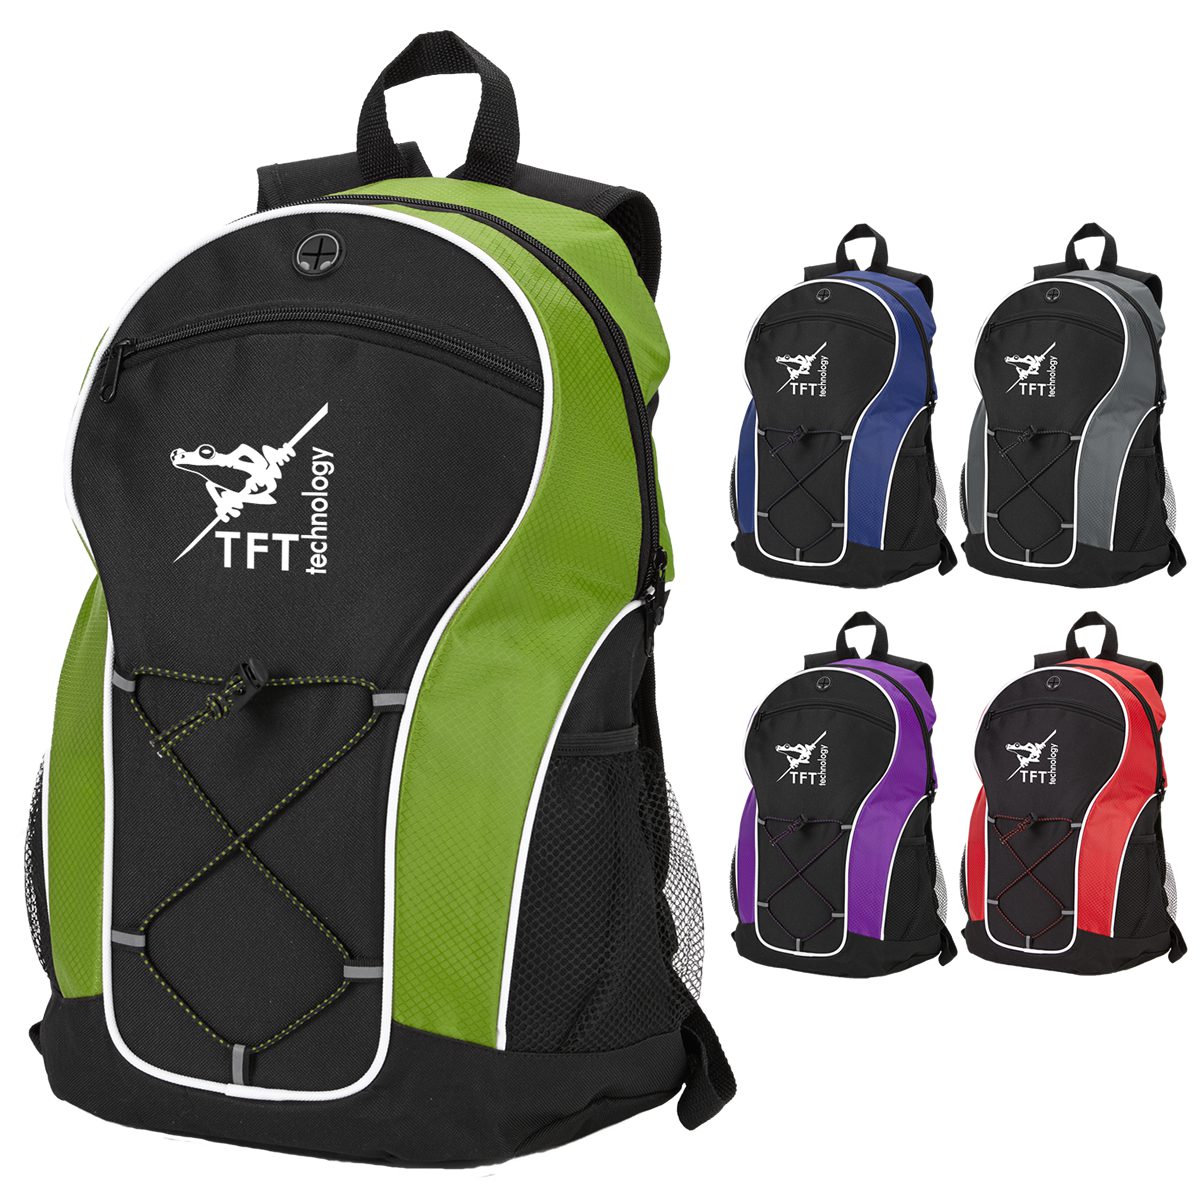 examples of back pack bags with vinyl heat pressed transfer